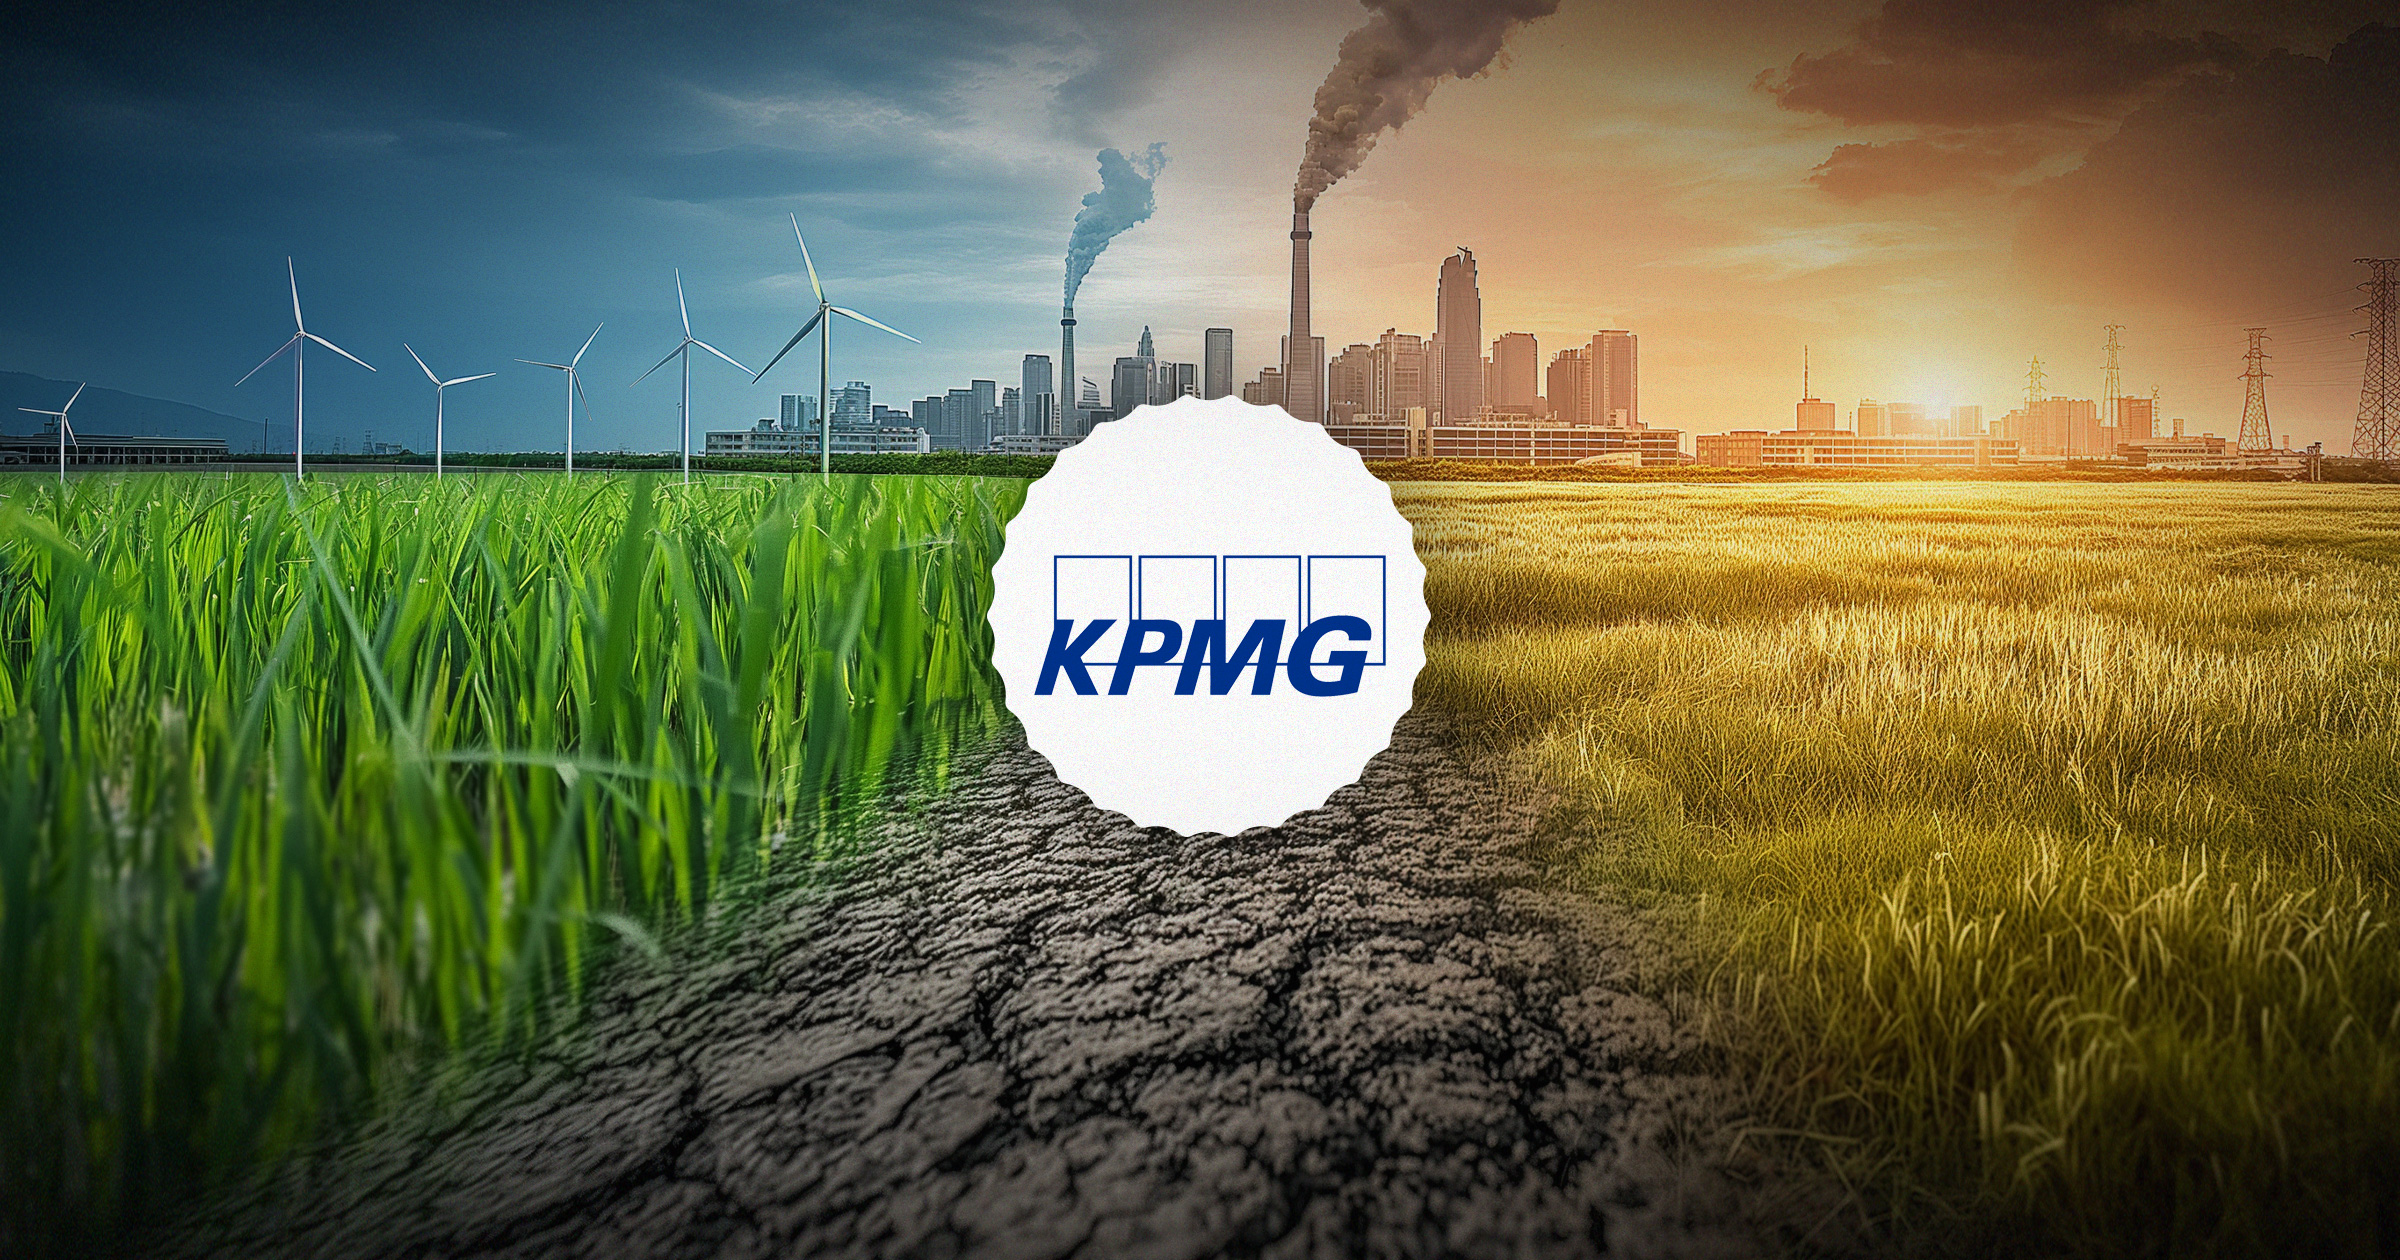 Image showing a split screen image of a dirty factory with dying grass and vegetation vs. a green factory with windmills and other green energy sources. KPMG-panelists-debunk-ESG-myths-surrounding-new-SEC-climate-rules.